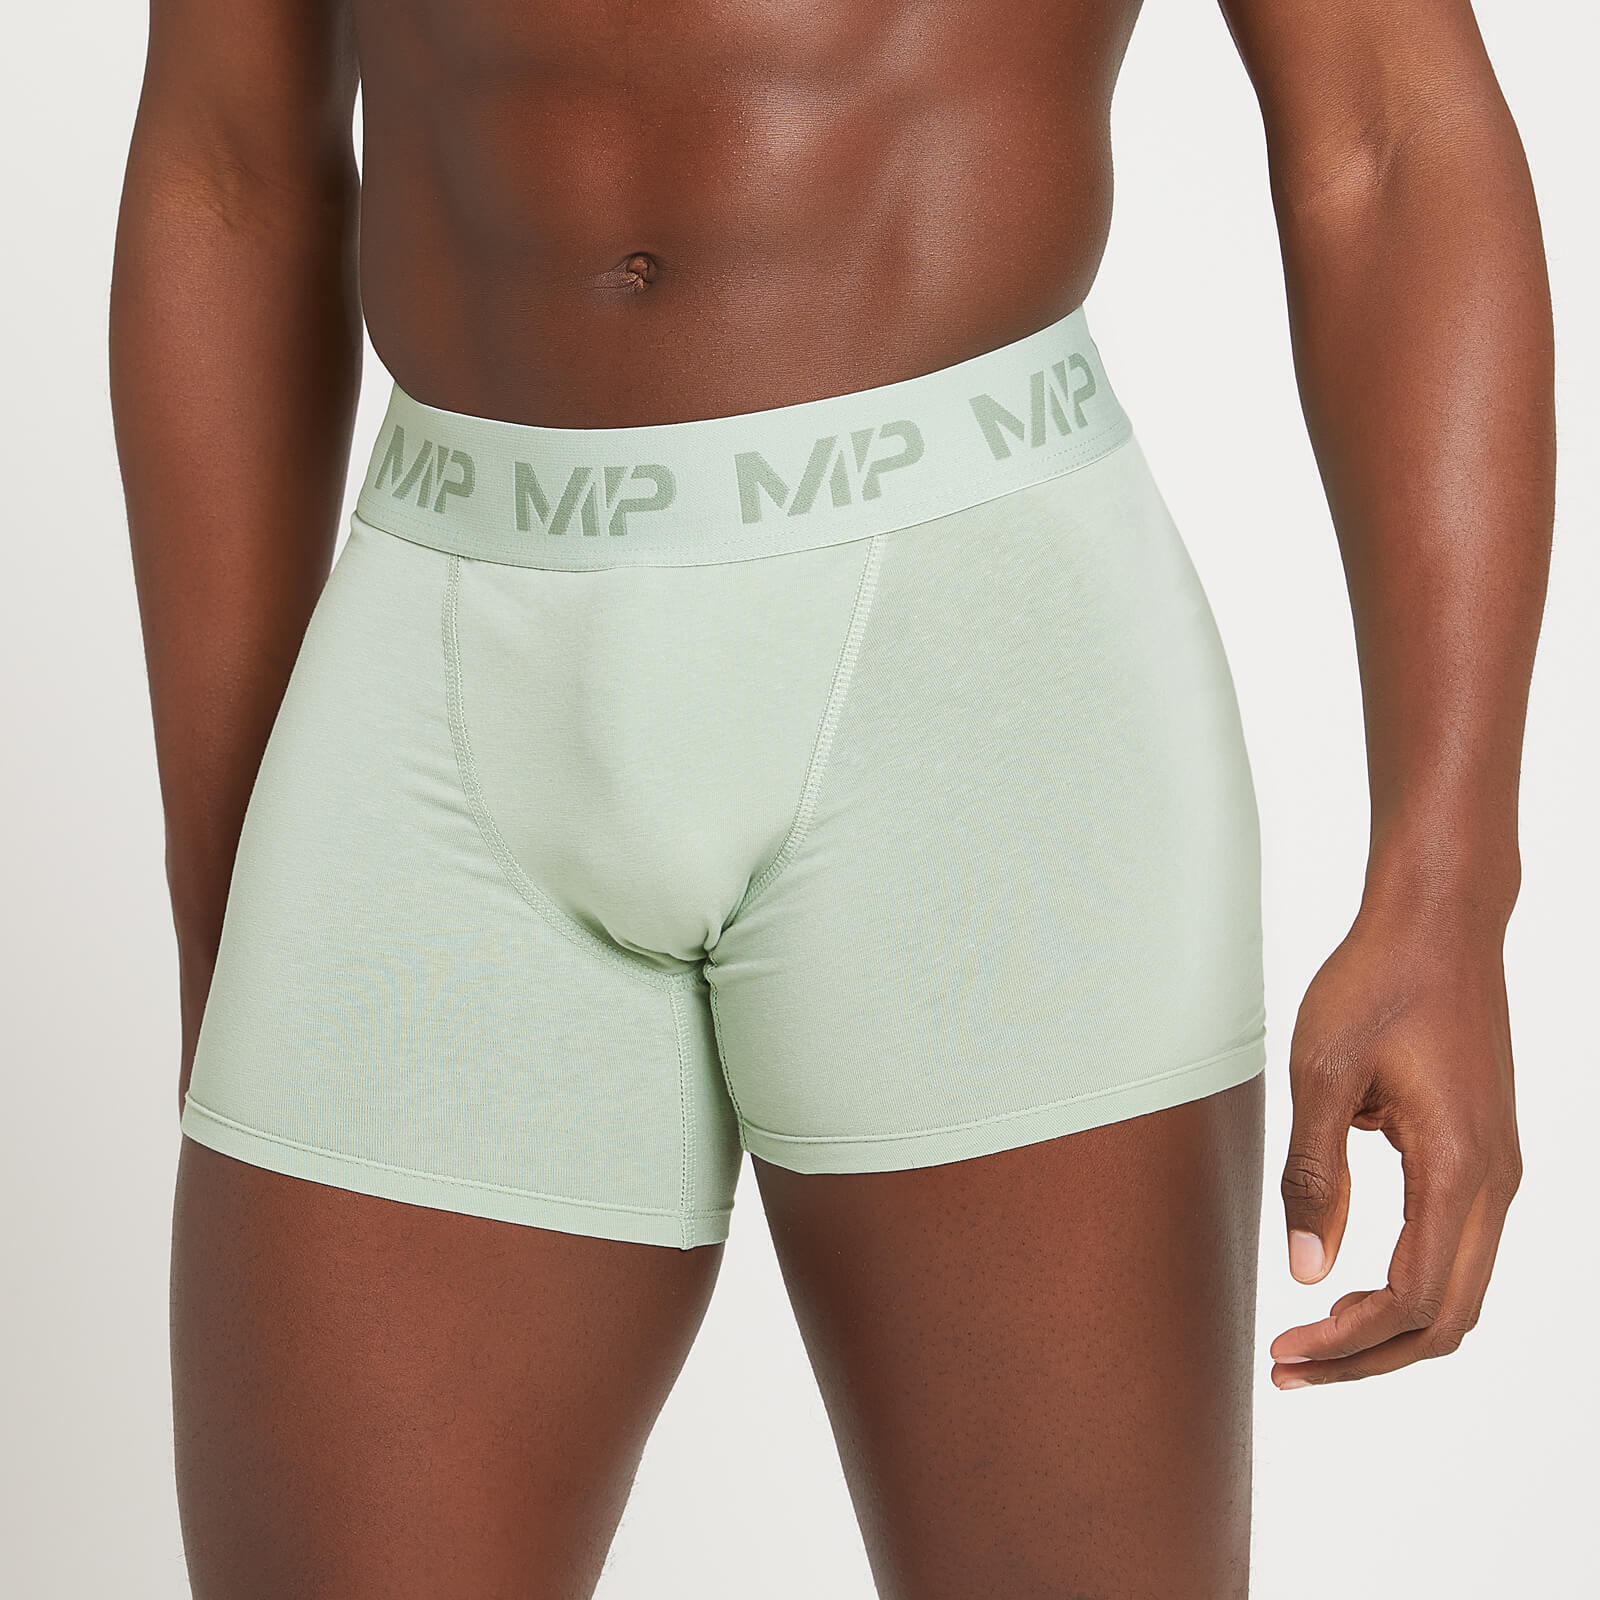 MP Men's Boxers (3 Pack) - Frost Green/Steel Blue/Ice Blue - XS